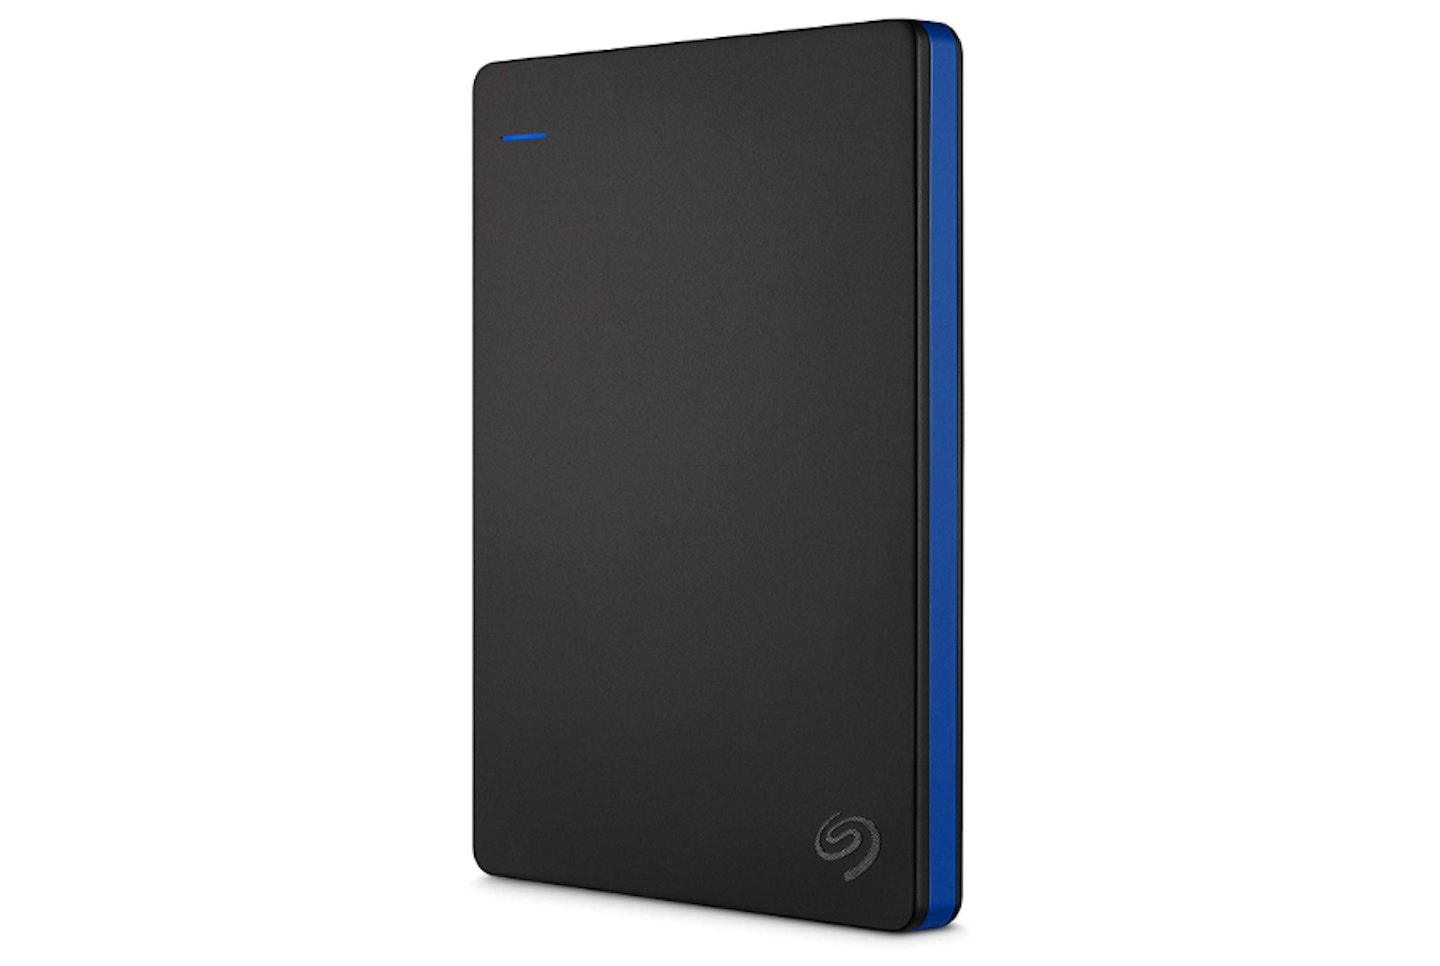 Seagate 2 TB Game Drive External Hard Drive for PS4